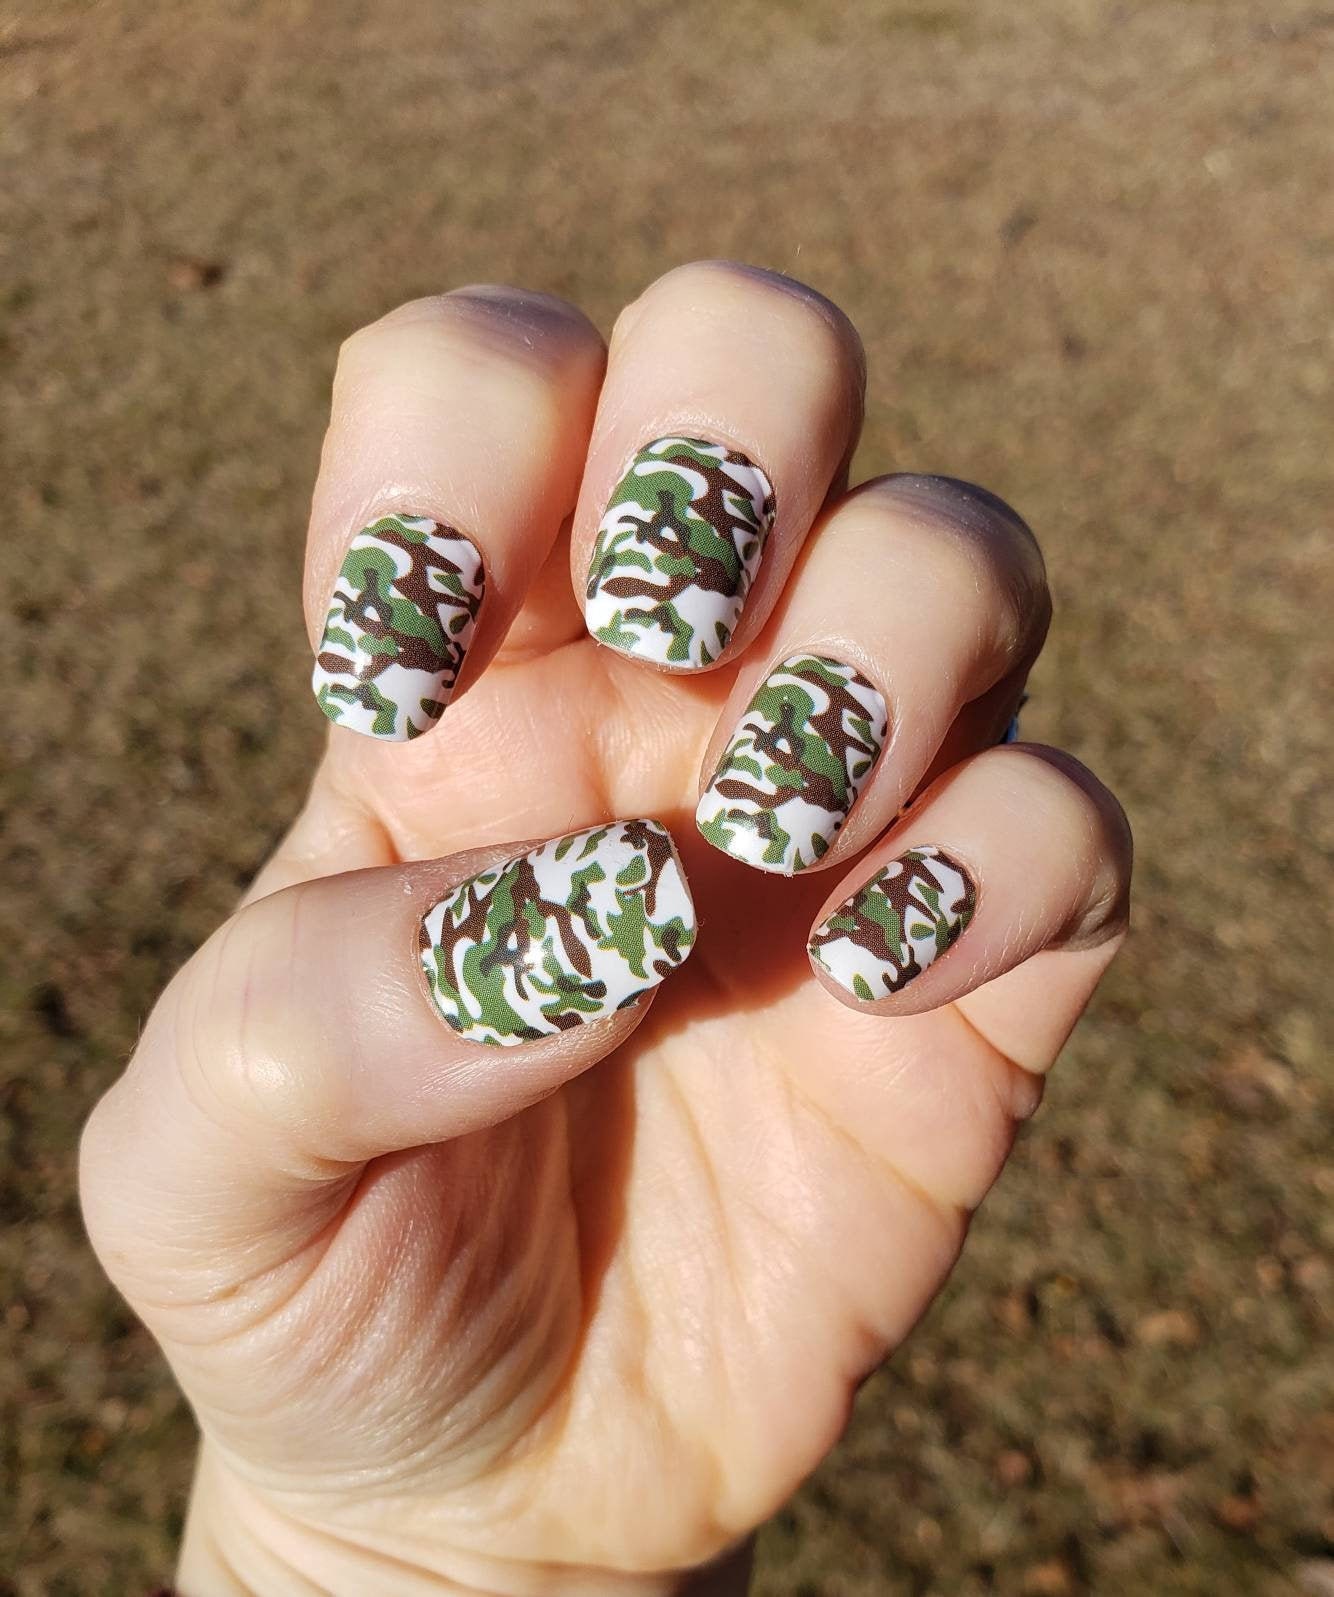 Miley Cyrus' Dope Camo Nails · How To Paint Patterned Nail Art · Beauty on  Cut Out + Keep